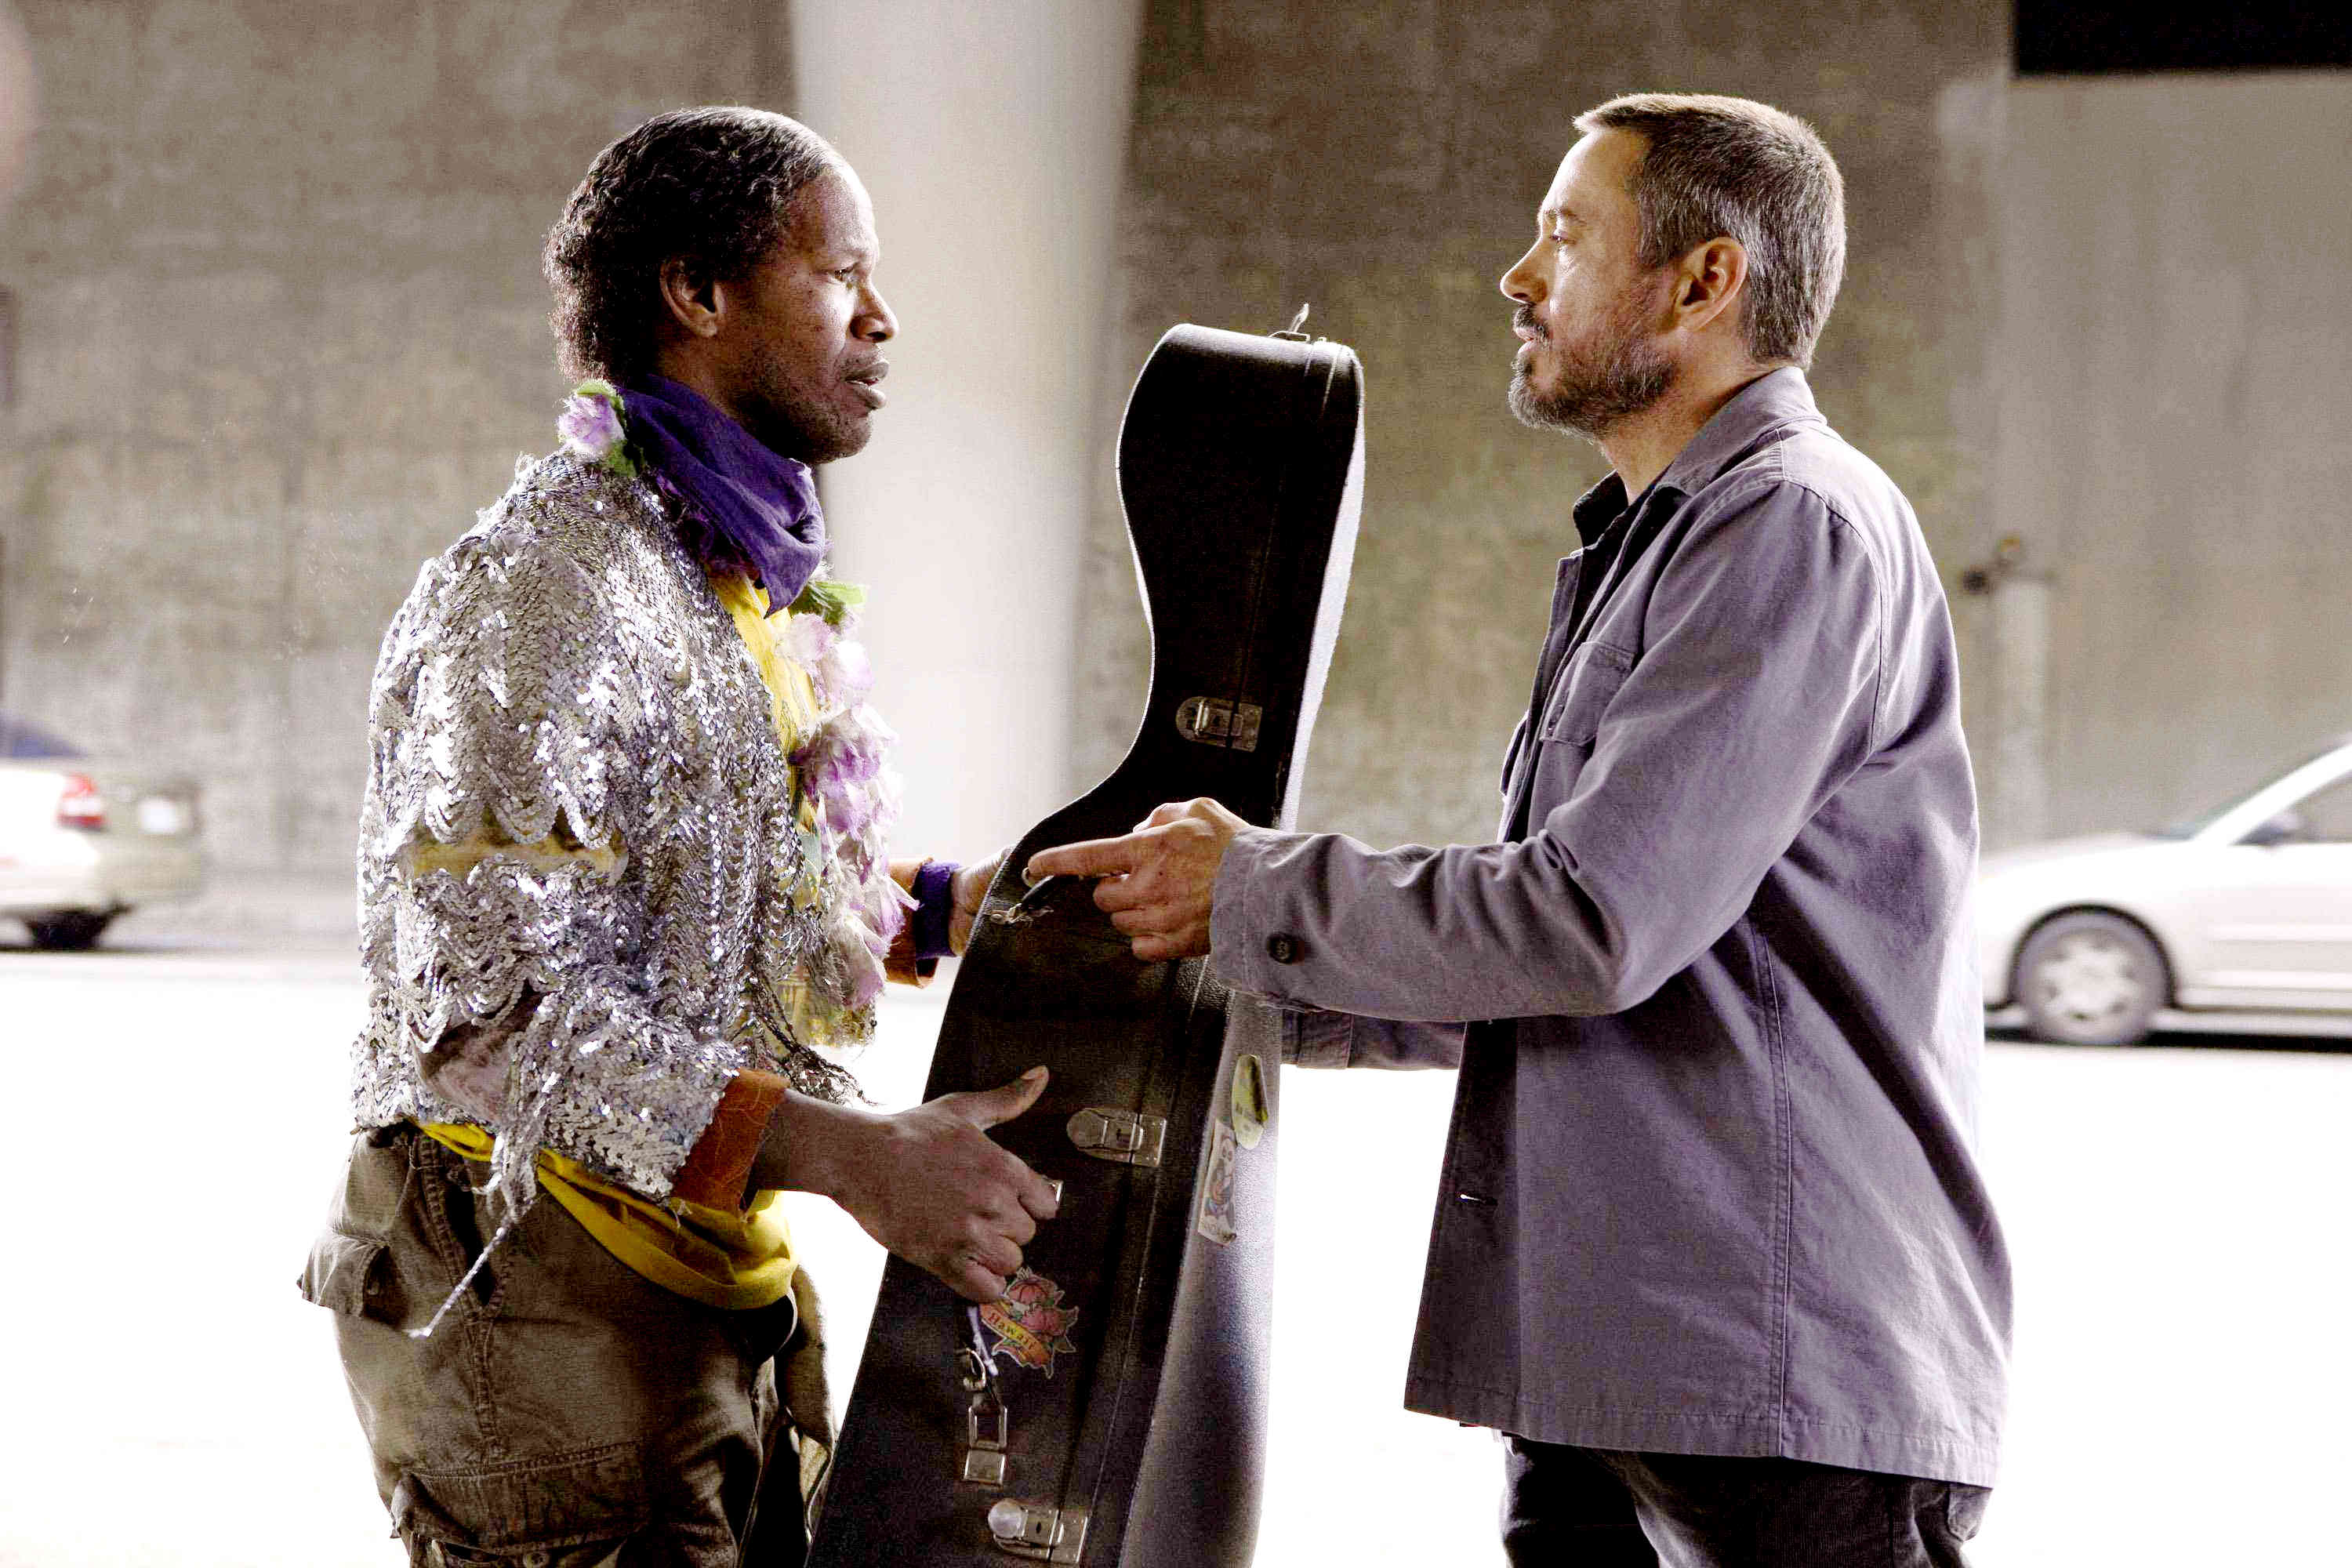 Jamie Foxx stars as Nathaniel Ayers and Robert Downey Jr. stars as Steve Lopez in DreamWorks' The Soloist (2009). Photo credit by Francois Duhamel.